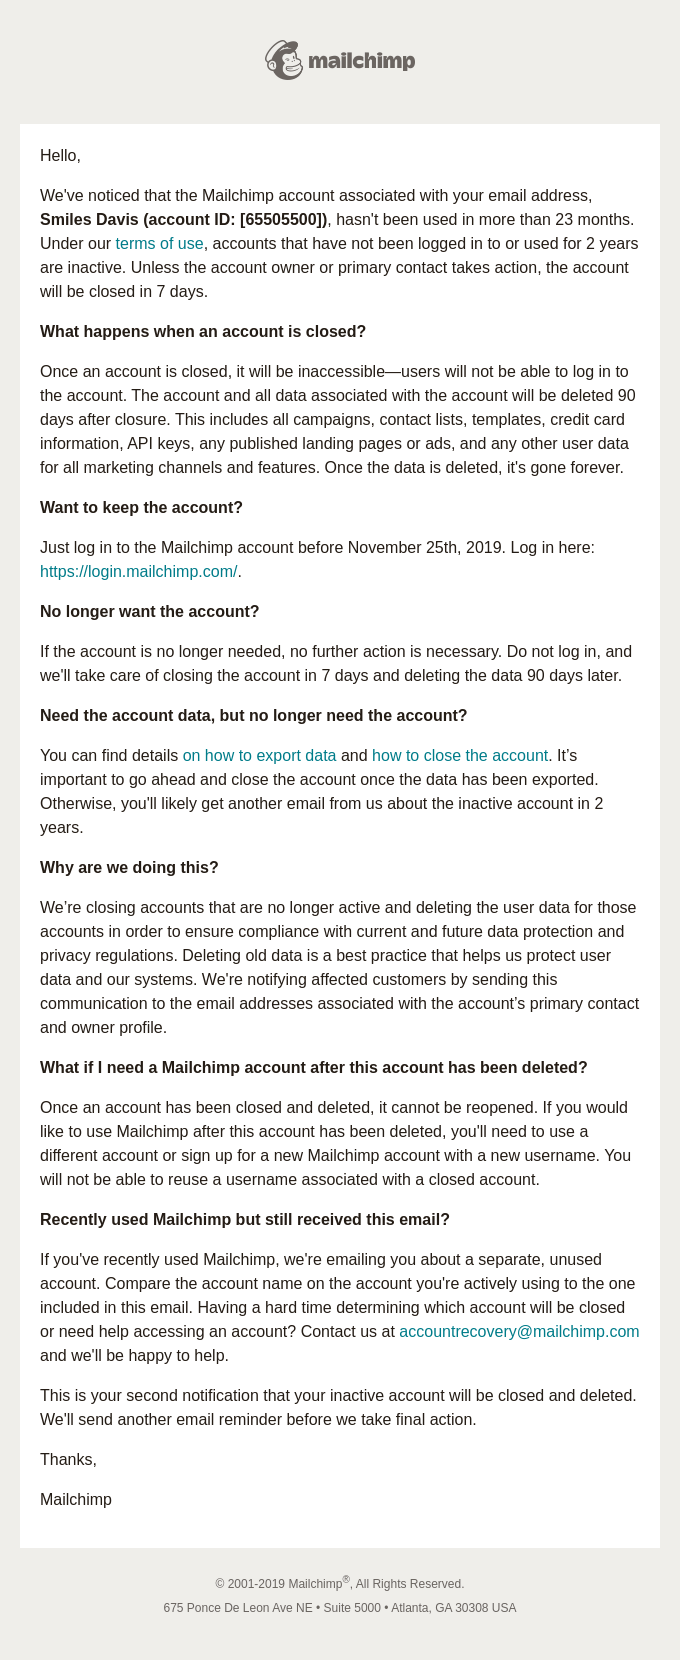 Account Removal Emails: Screenshot of Mailchimp's account deactivation notification email to users